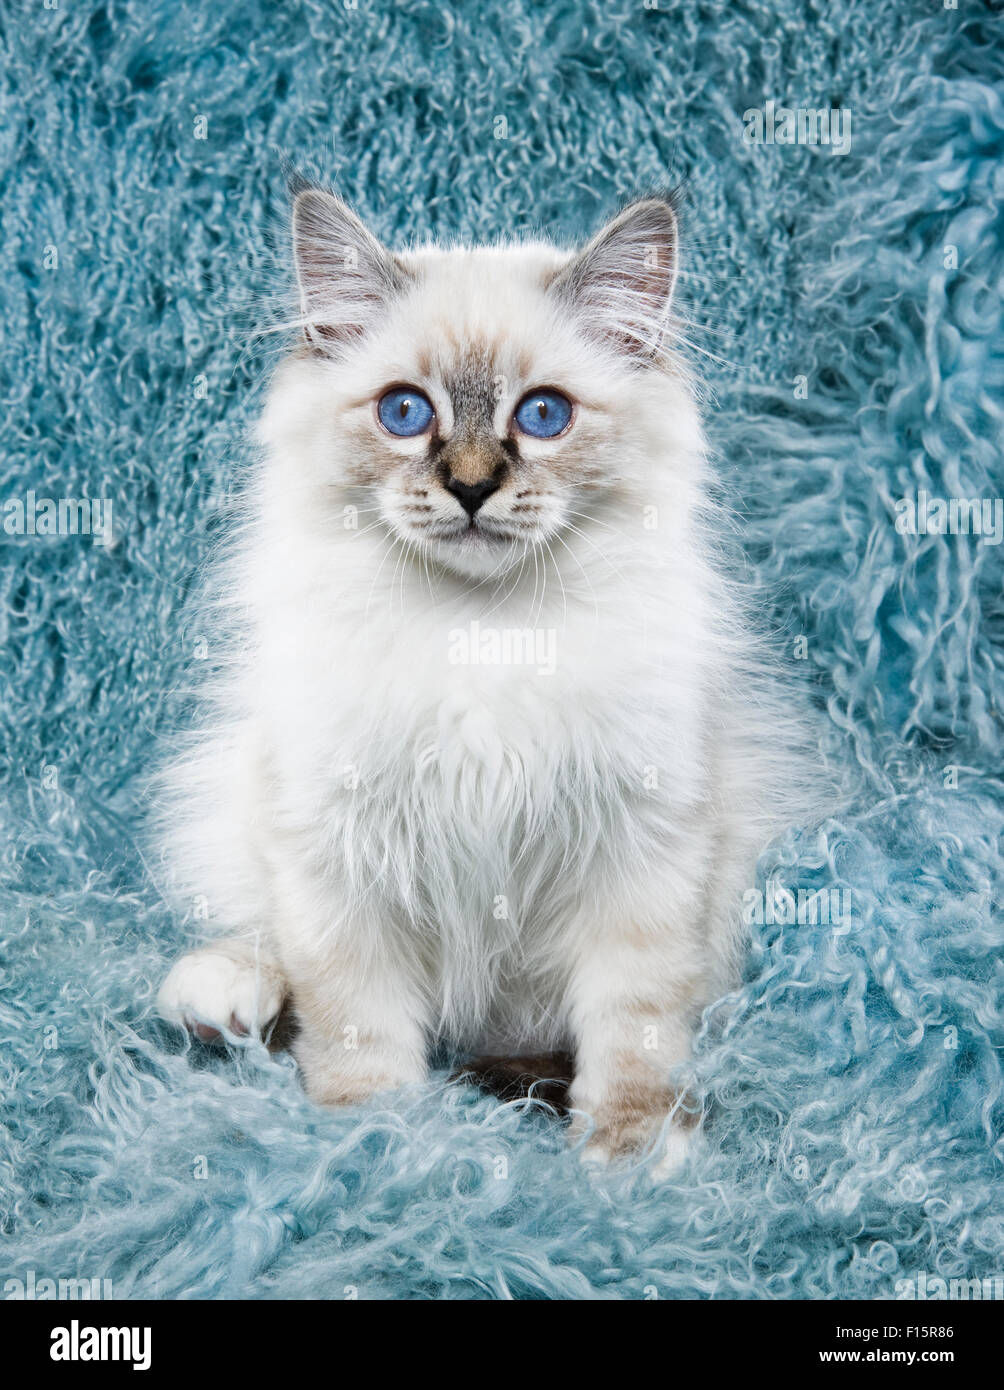 portrait of fluffy white Ragdoll kitten with piercing blue eyes on  turquoise long hair textured background Stock Photo - Alamy